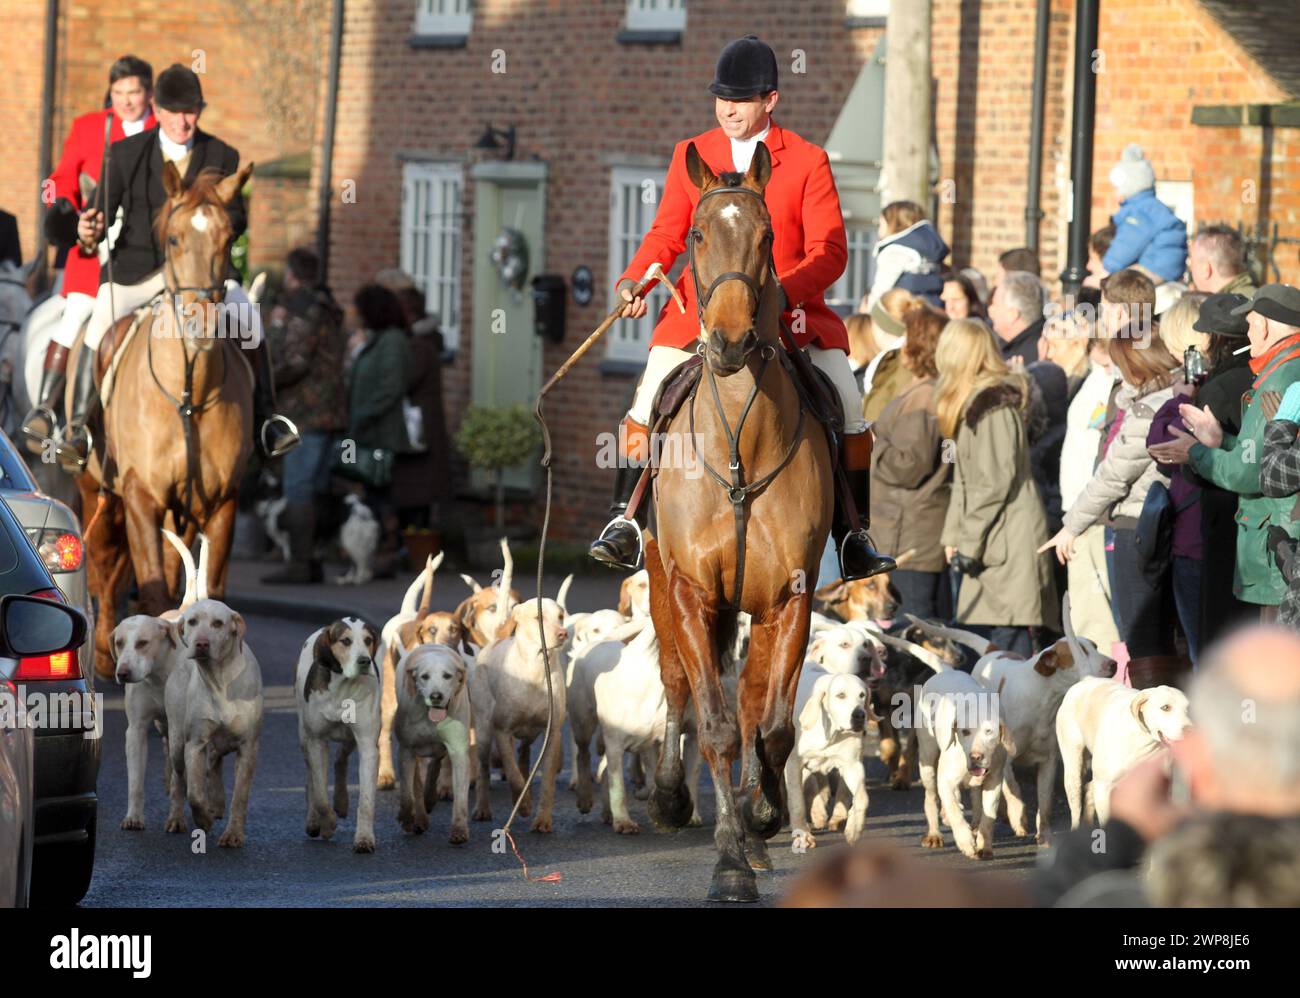 26/12/12   The Meynell and South Staffordshire Hunt gather for their Boxing Day hunt in Abbots Bromley, Staffordshire. All Rights Reserved - F Stop Pr Stock Photo